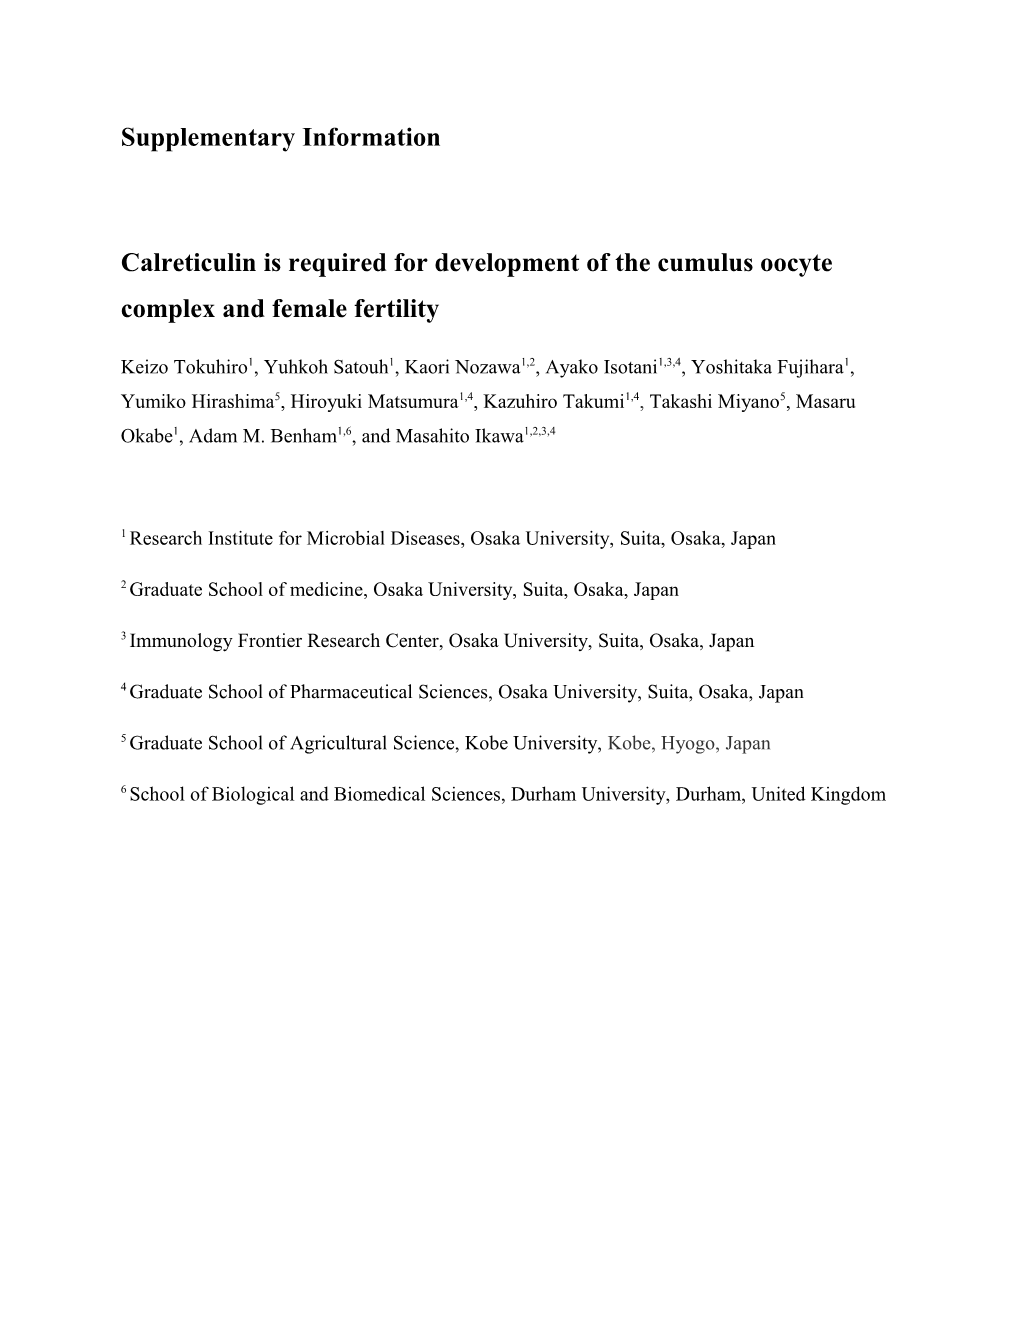 Calreticulin Is Required for Development of the Cumulus Oocyte Complex and Female Fertility